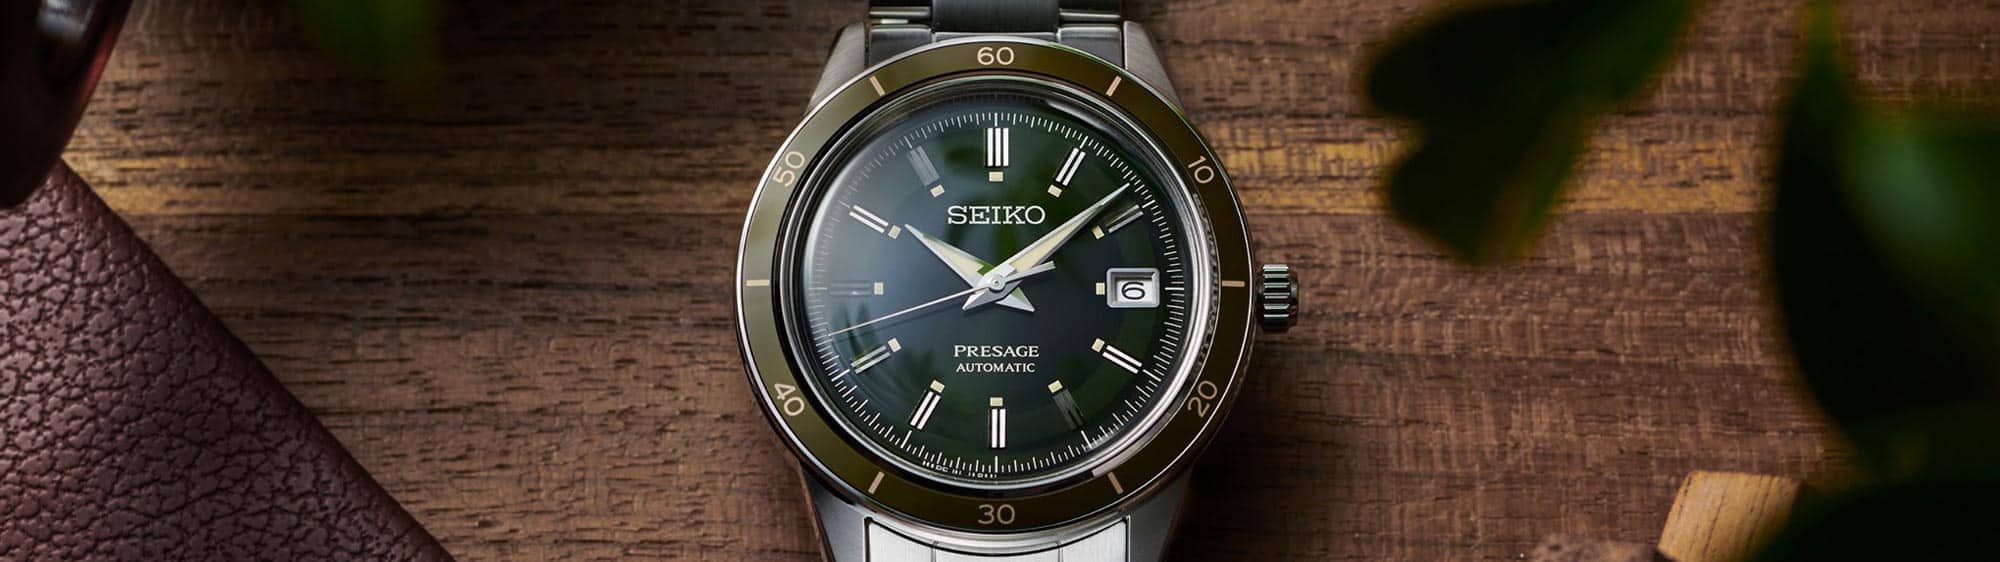 Seiko | Coutura | Essentials | Watches in Show Low, AZ